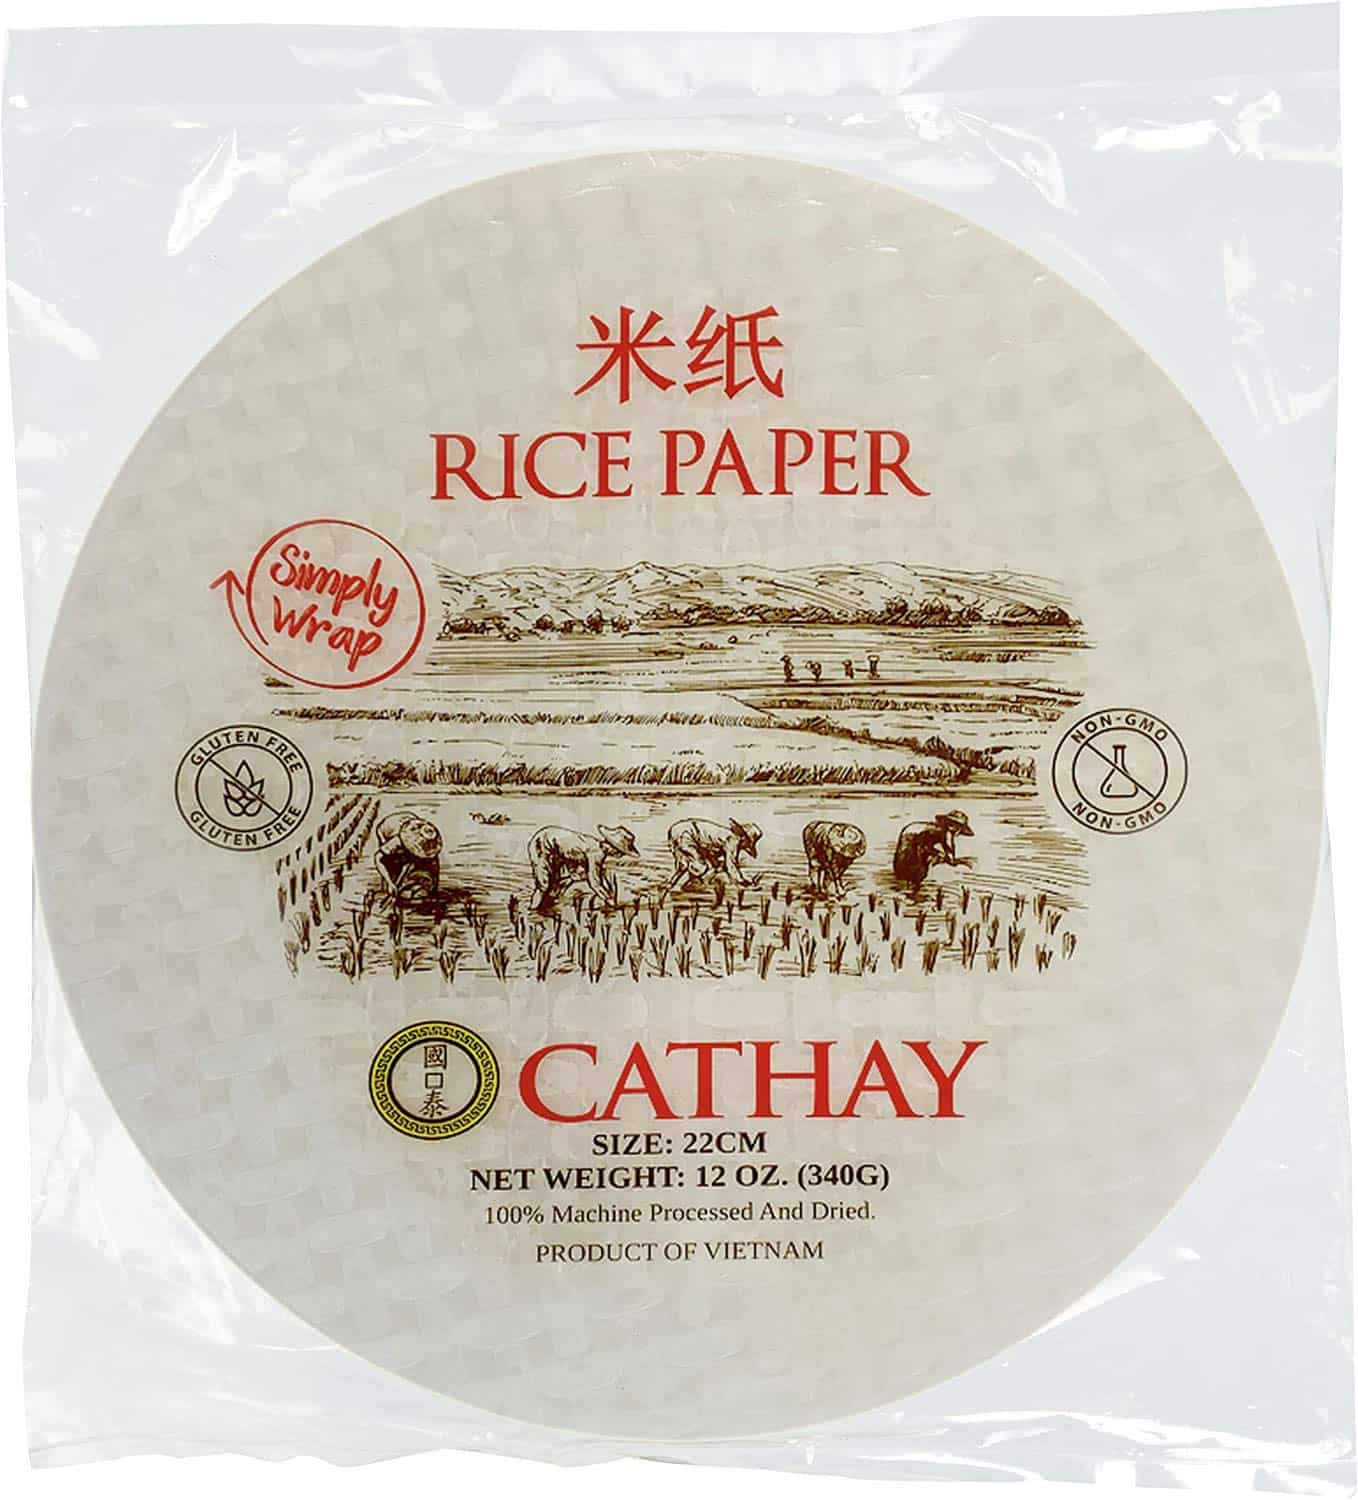 Rice paper wrappers as a substitute for egg roll wrappers